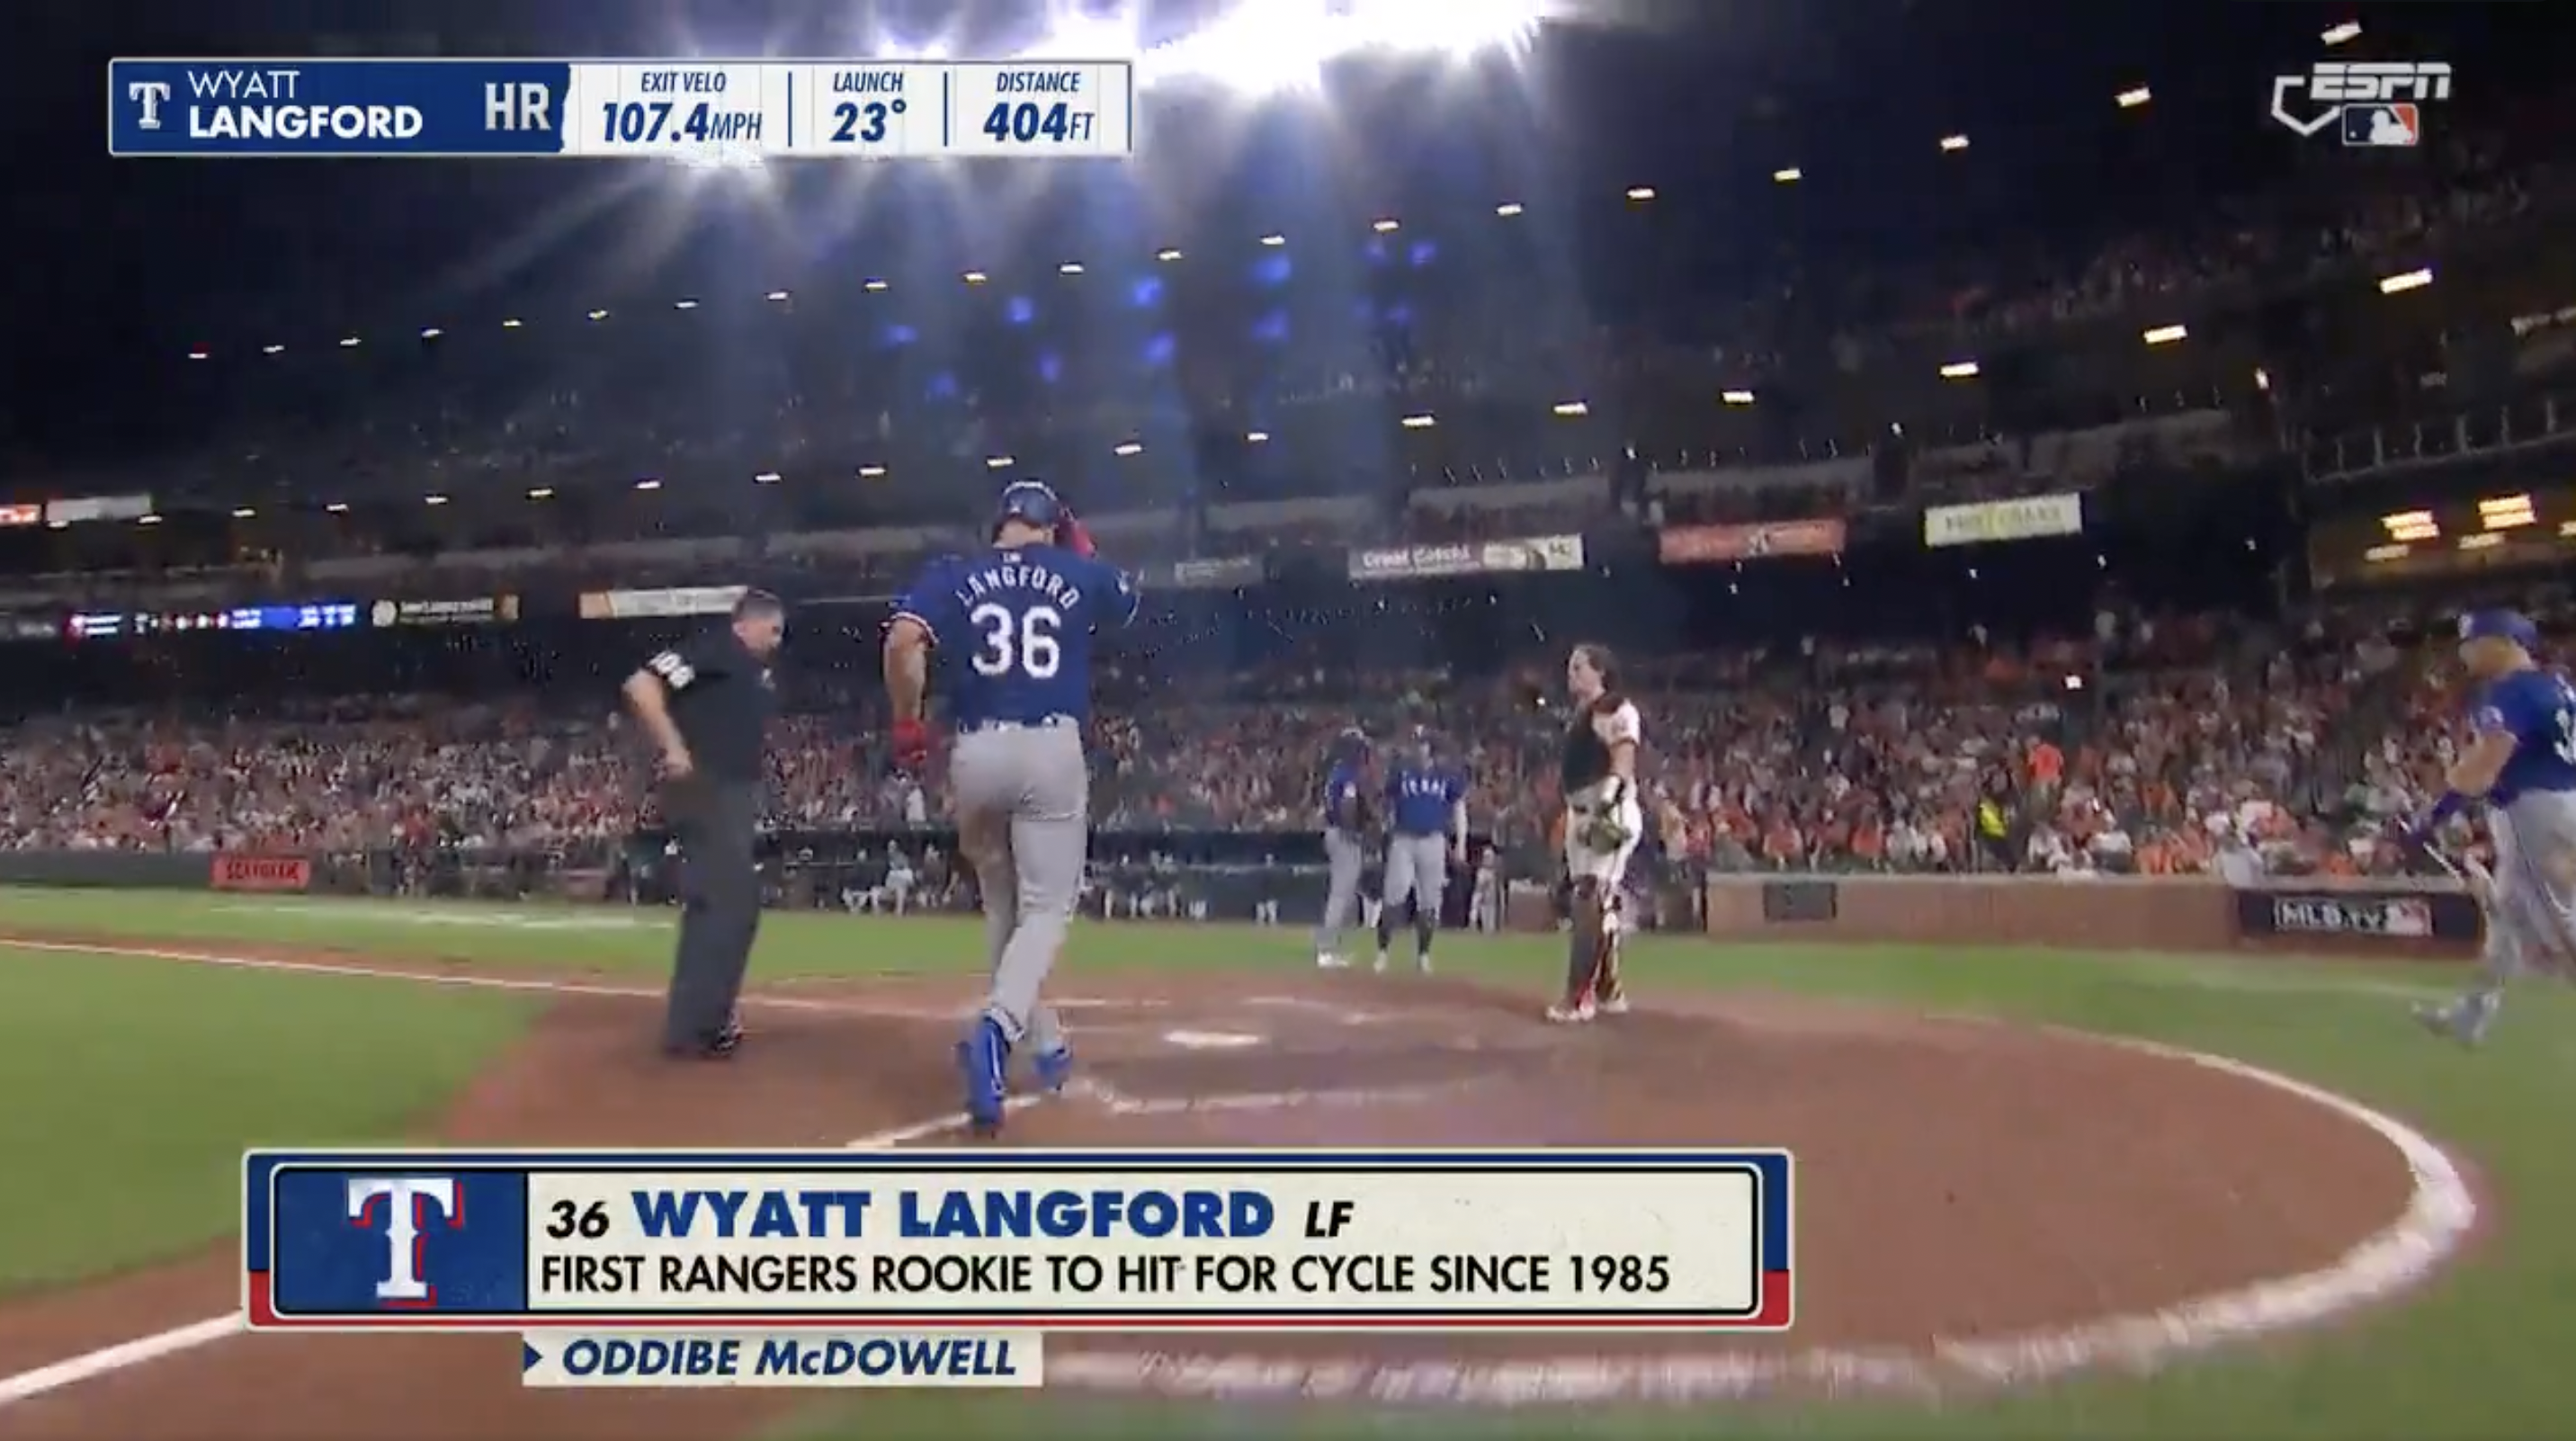 Wyatt Langford reaching home base and hitting for the cycle.